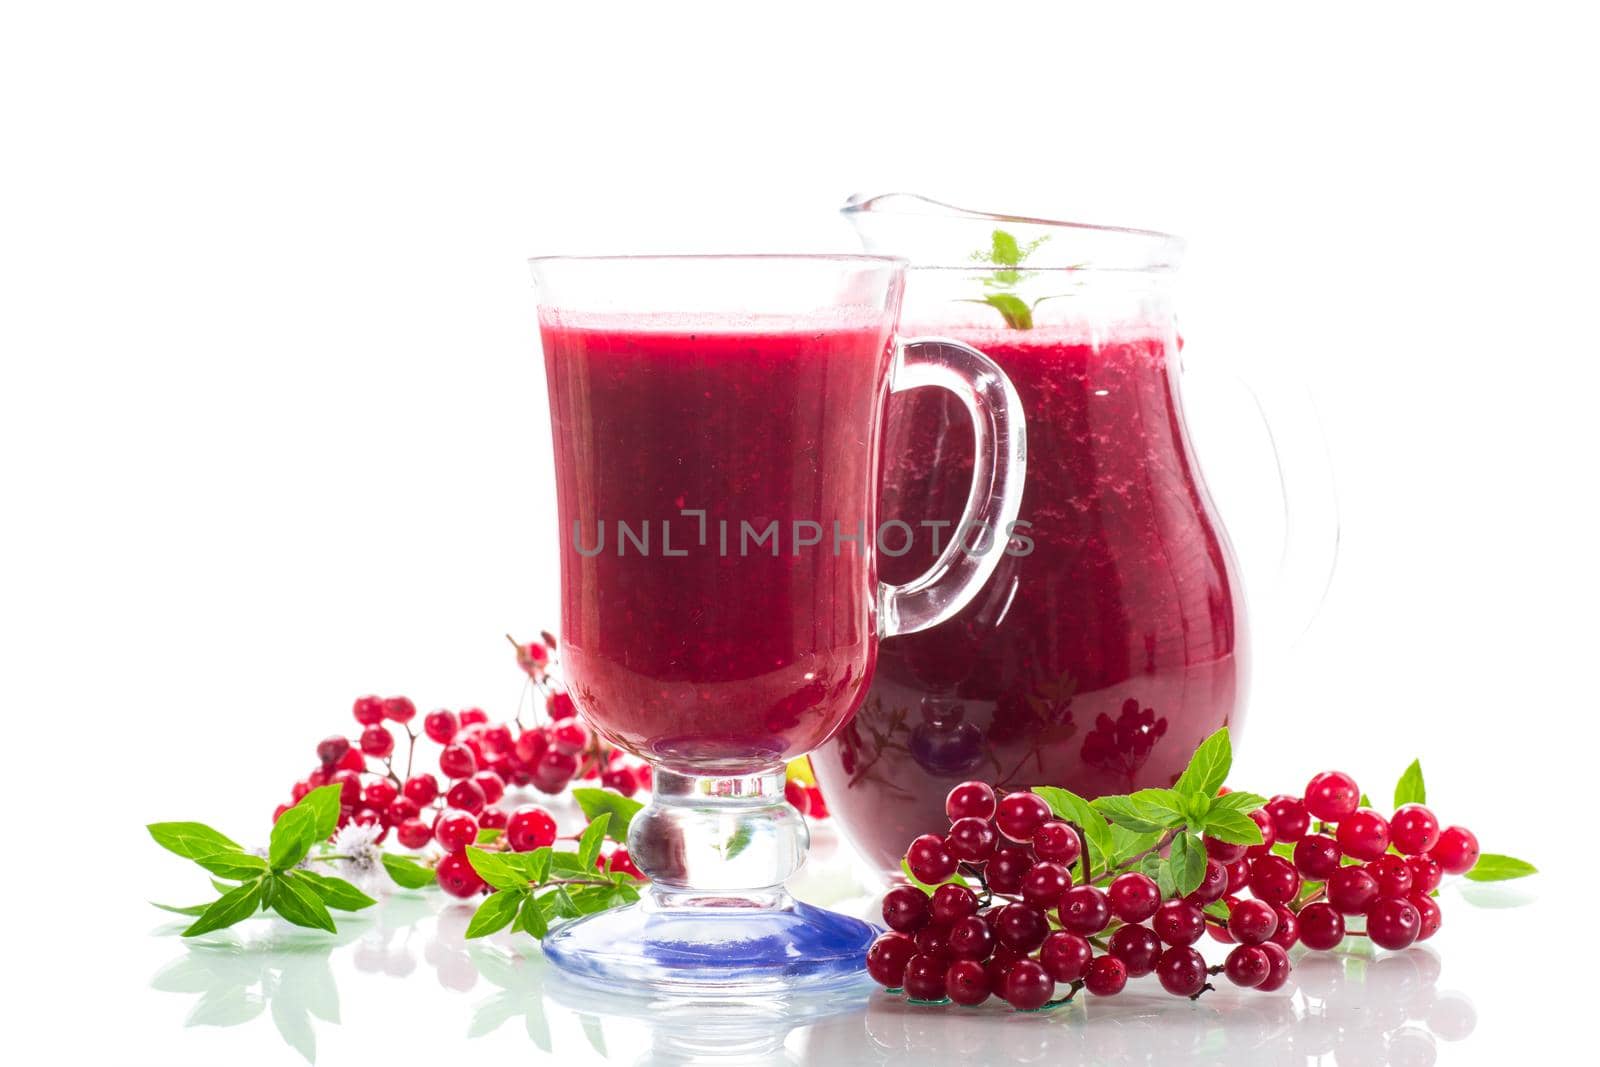 freshly squeezed thick natural juice with pulp of ripe red viburnum in a decanter on a white background